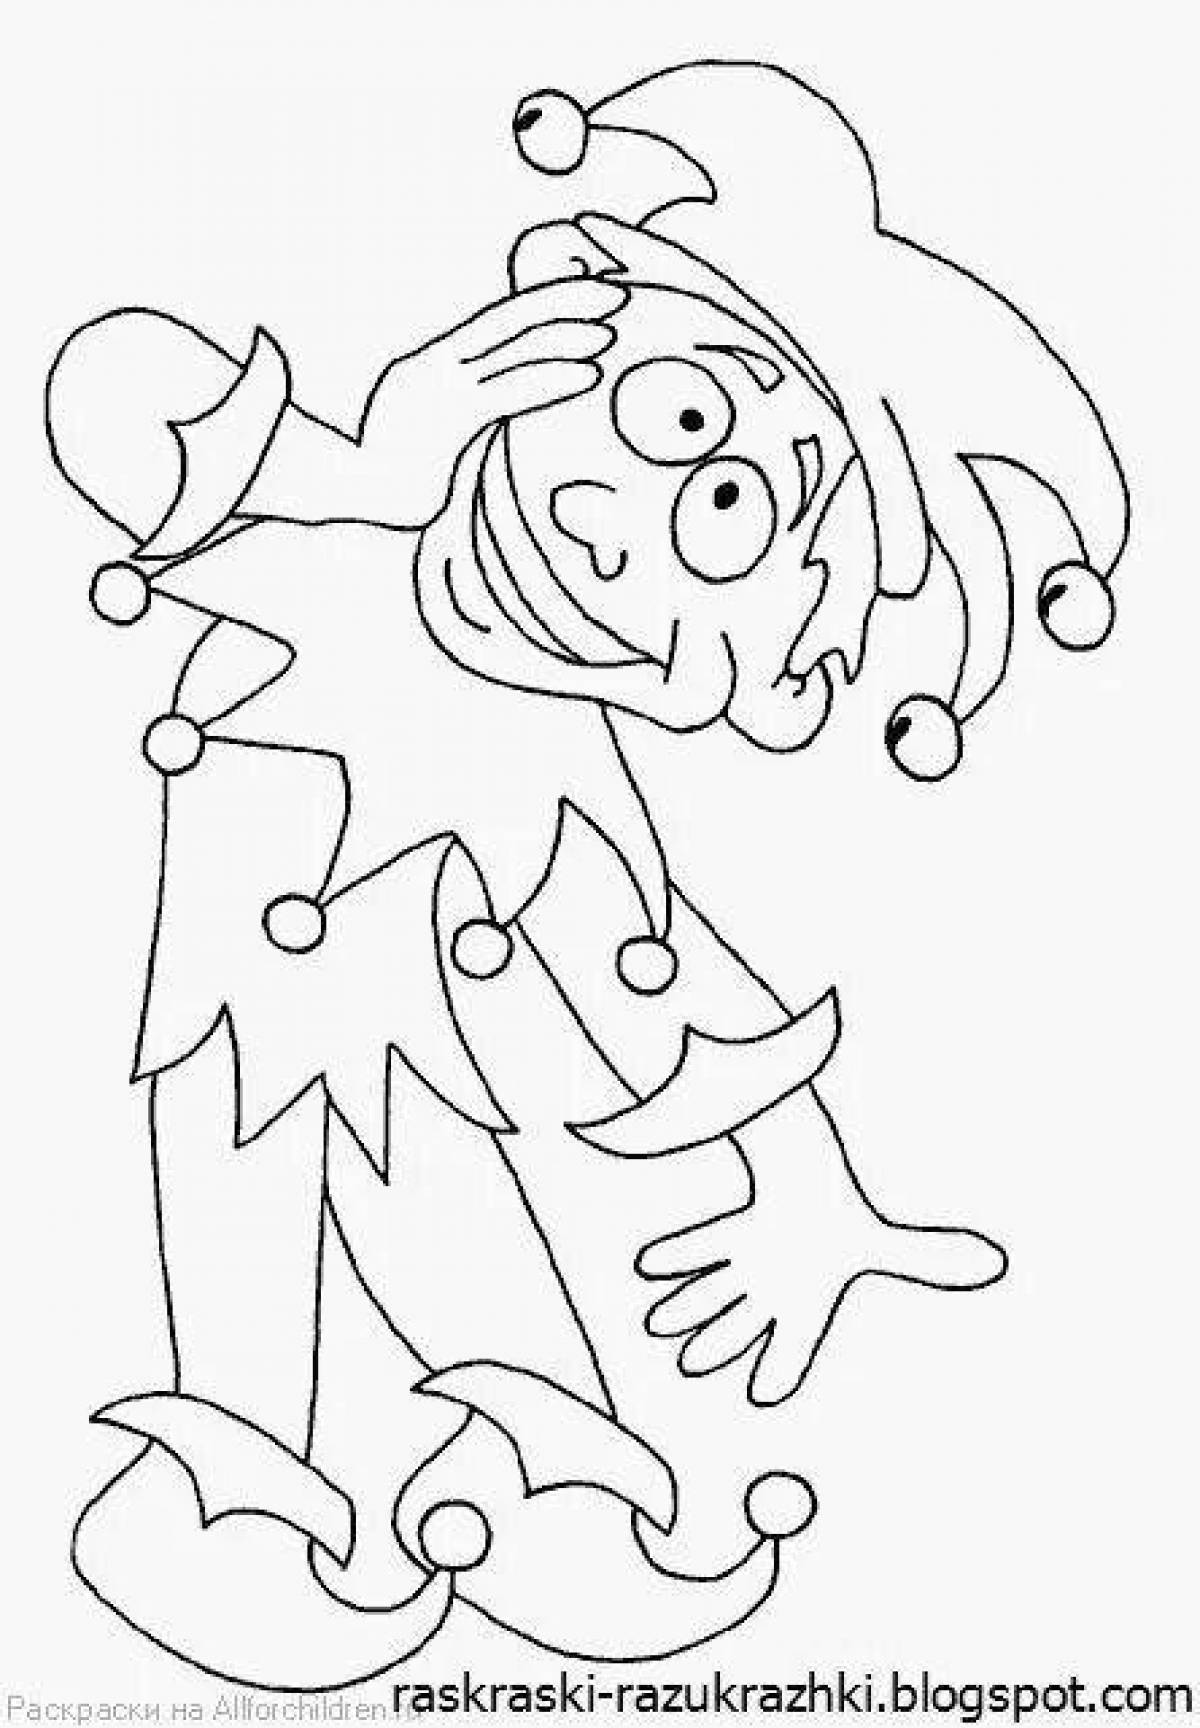 Coloring book shining jester